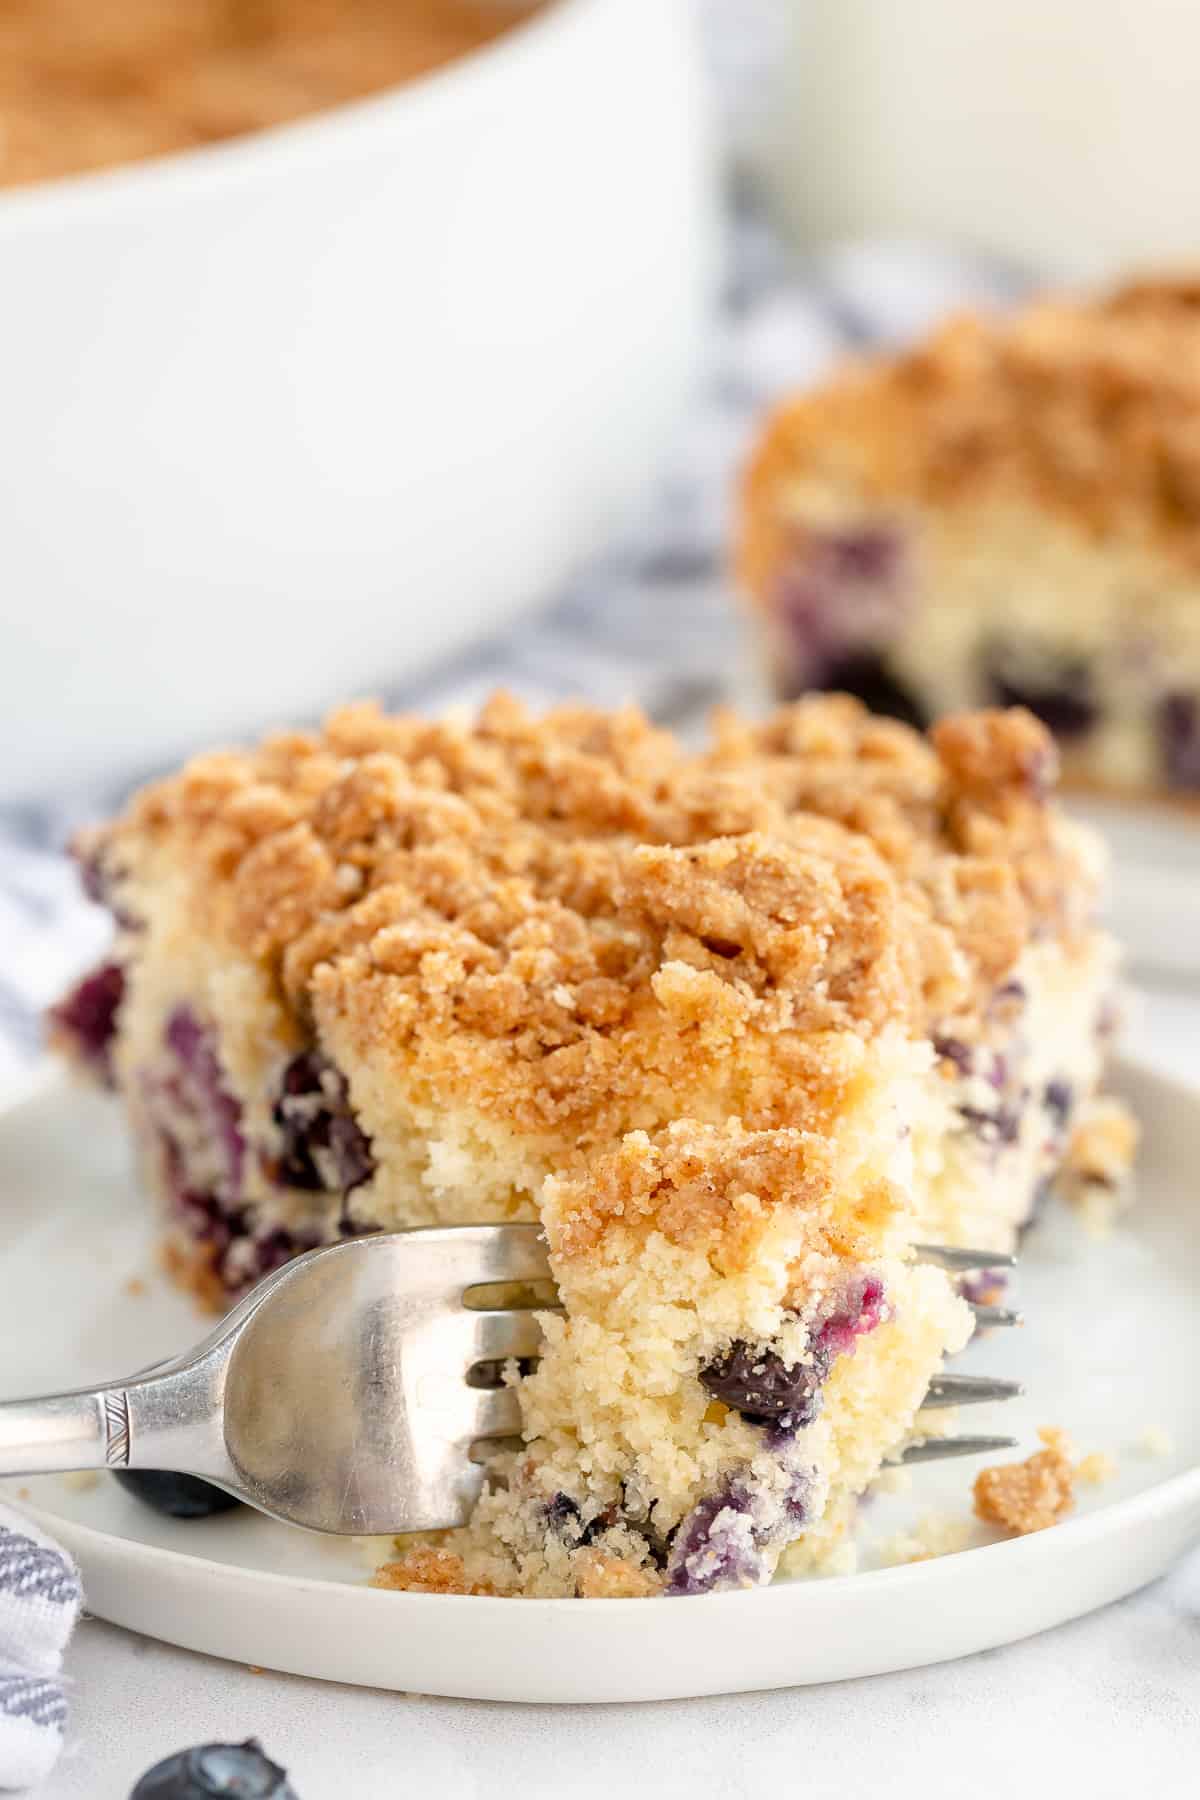 A fork pulls away a bite from a slice of Blueberry Crumb Cake.